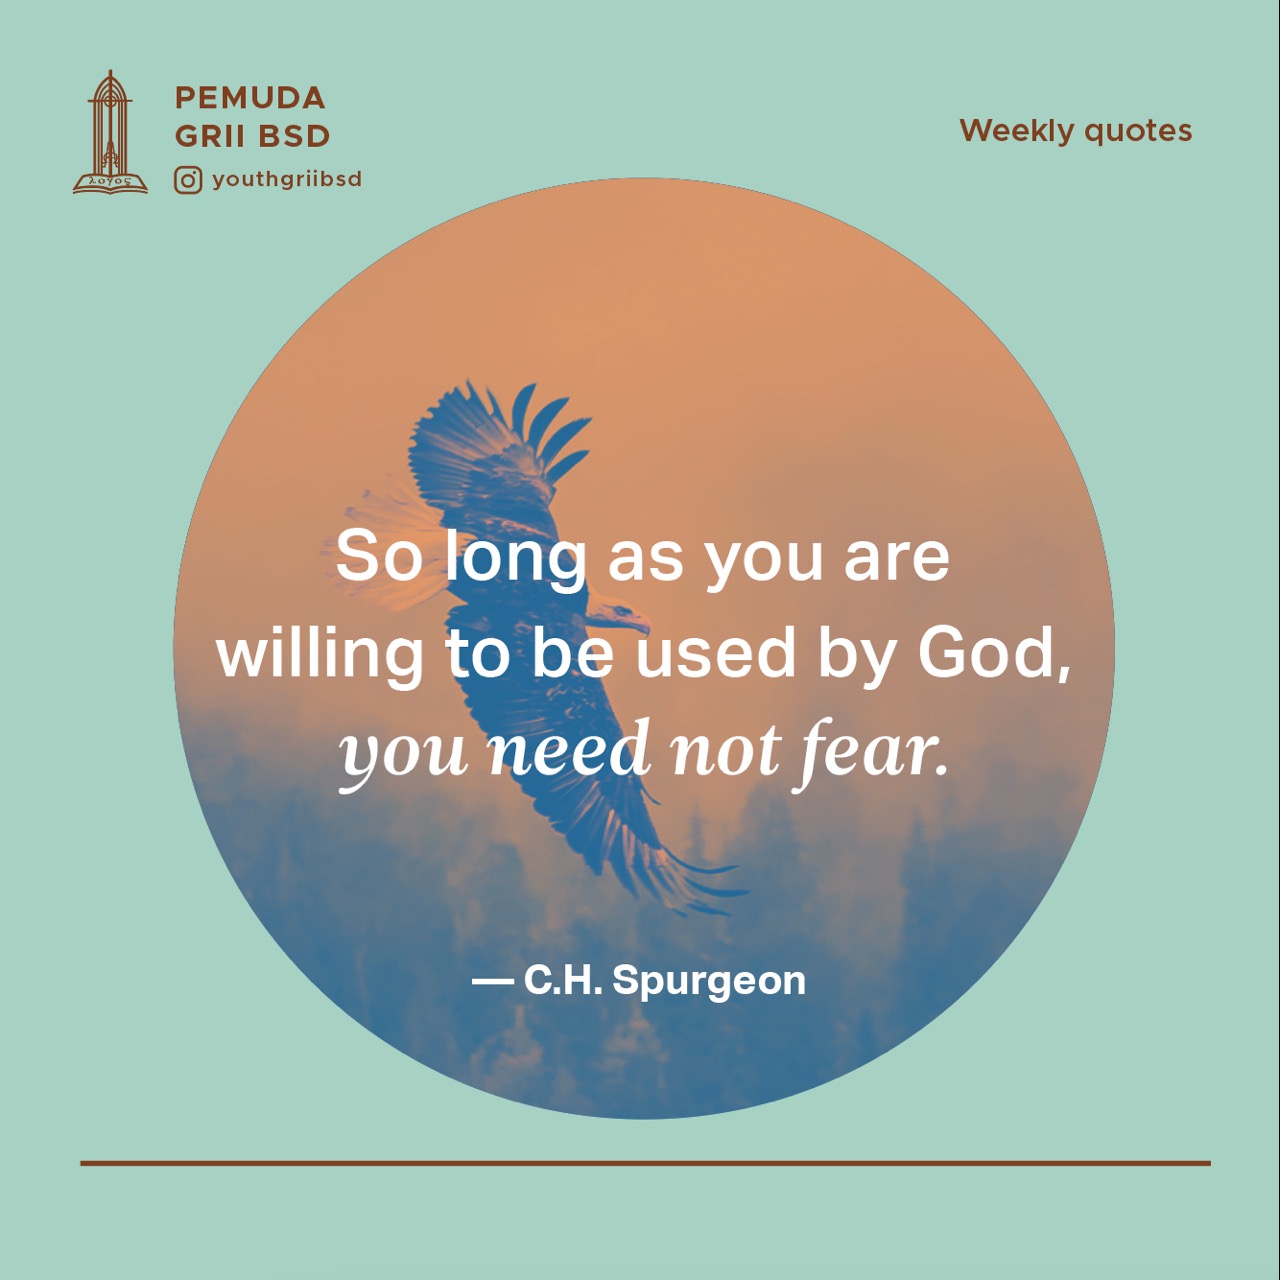 So long as you are willing to be used by God, you need not fear.